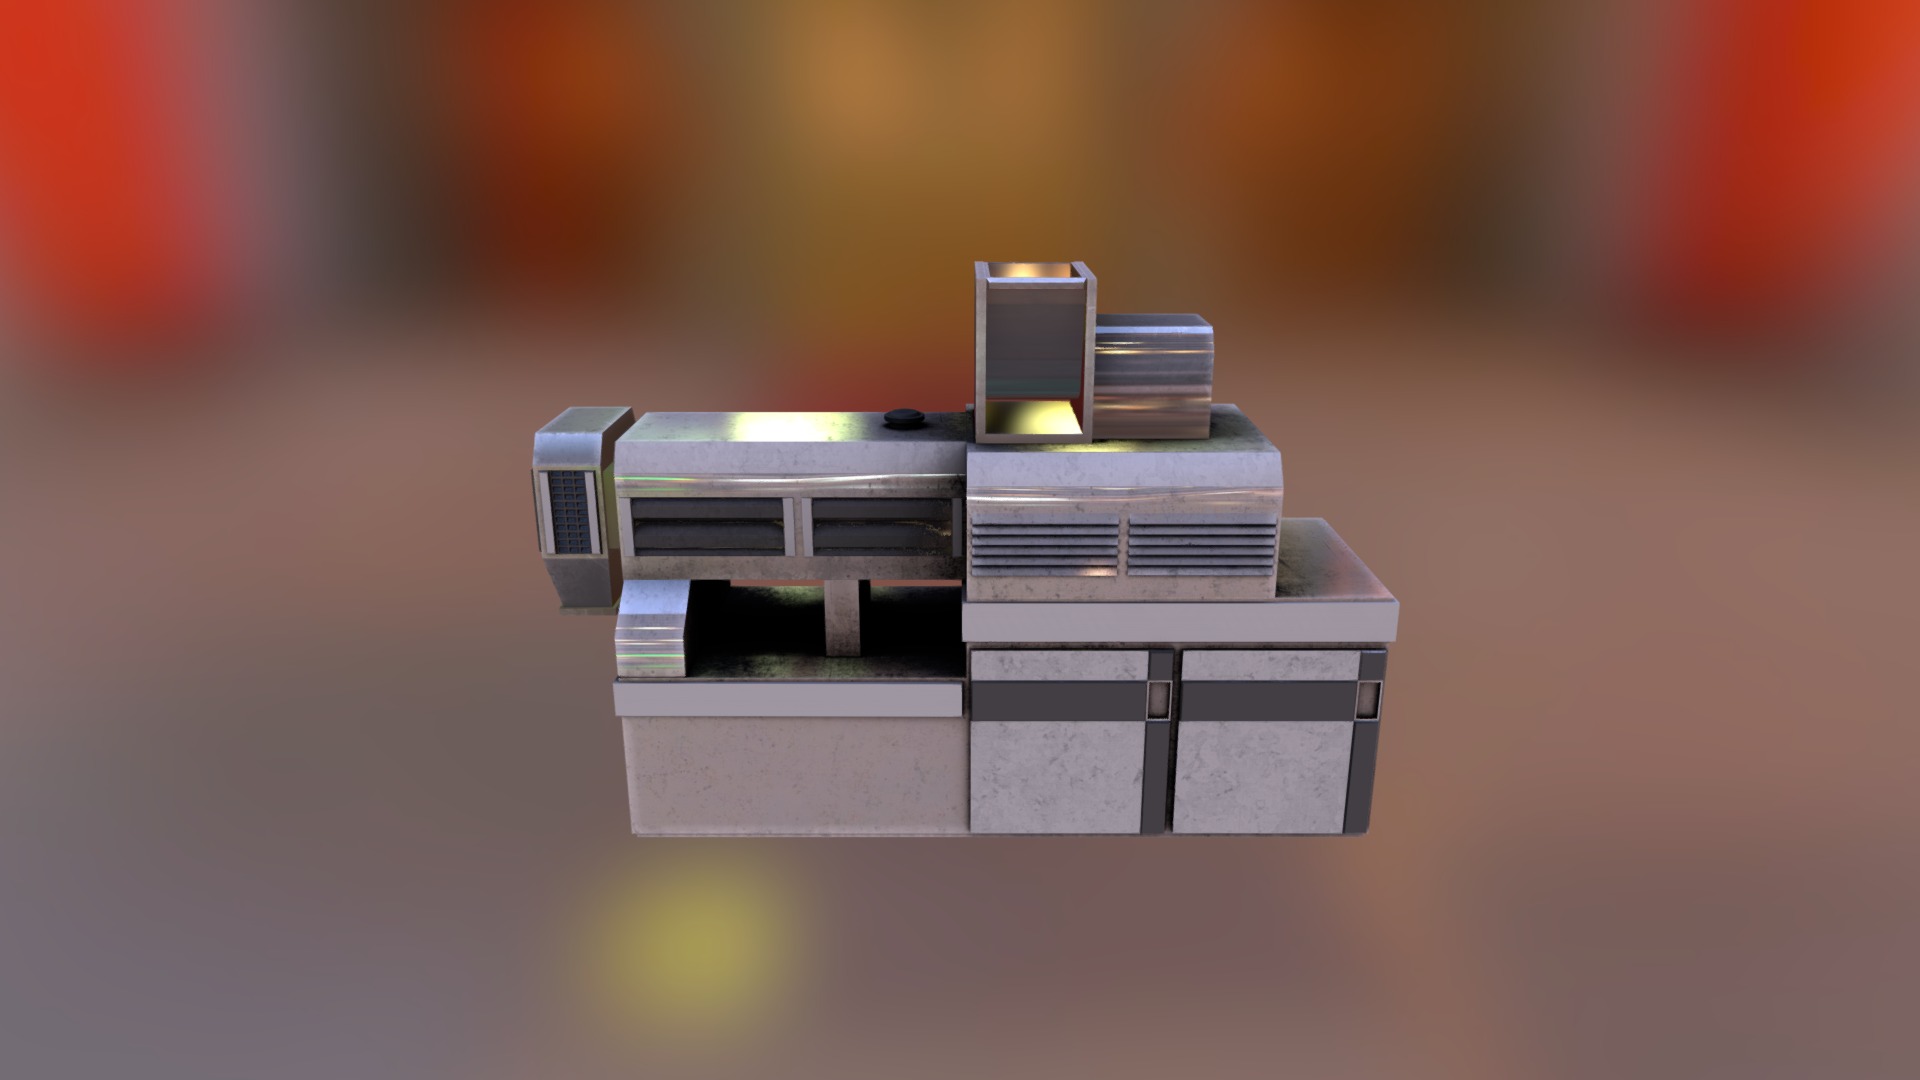 3D model Kibble Machine - This is a 3D model of the Kibble Machine. The 3D model is about a group of objects on a surface.